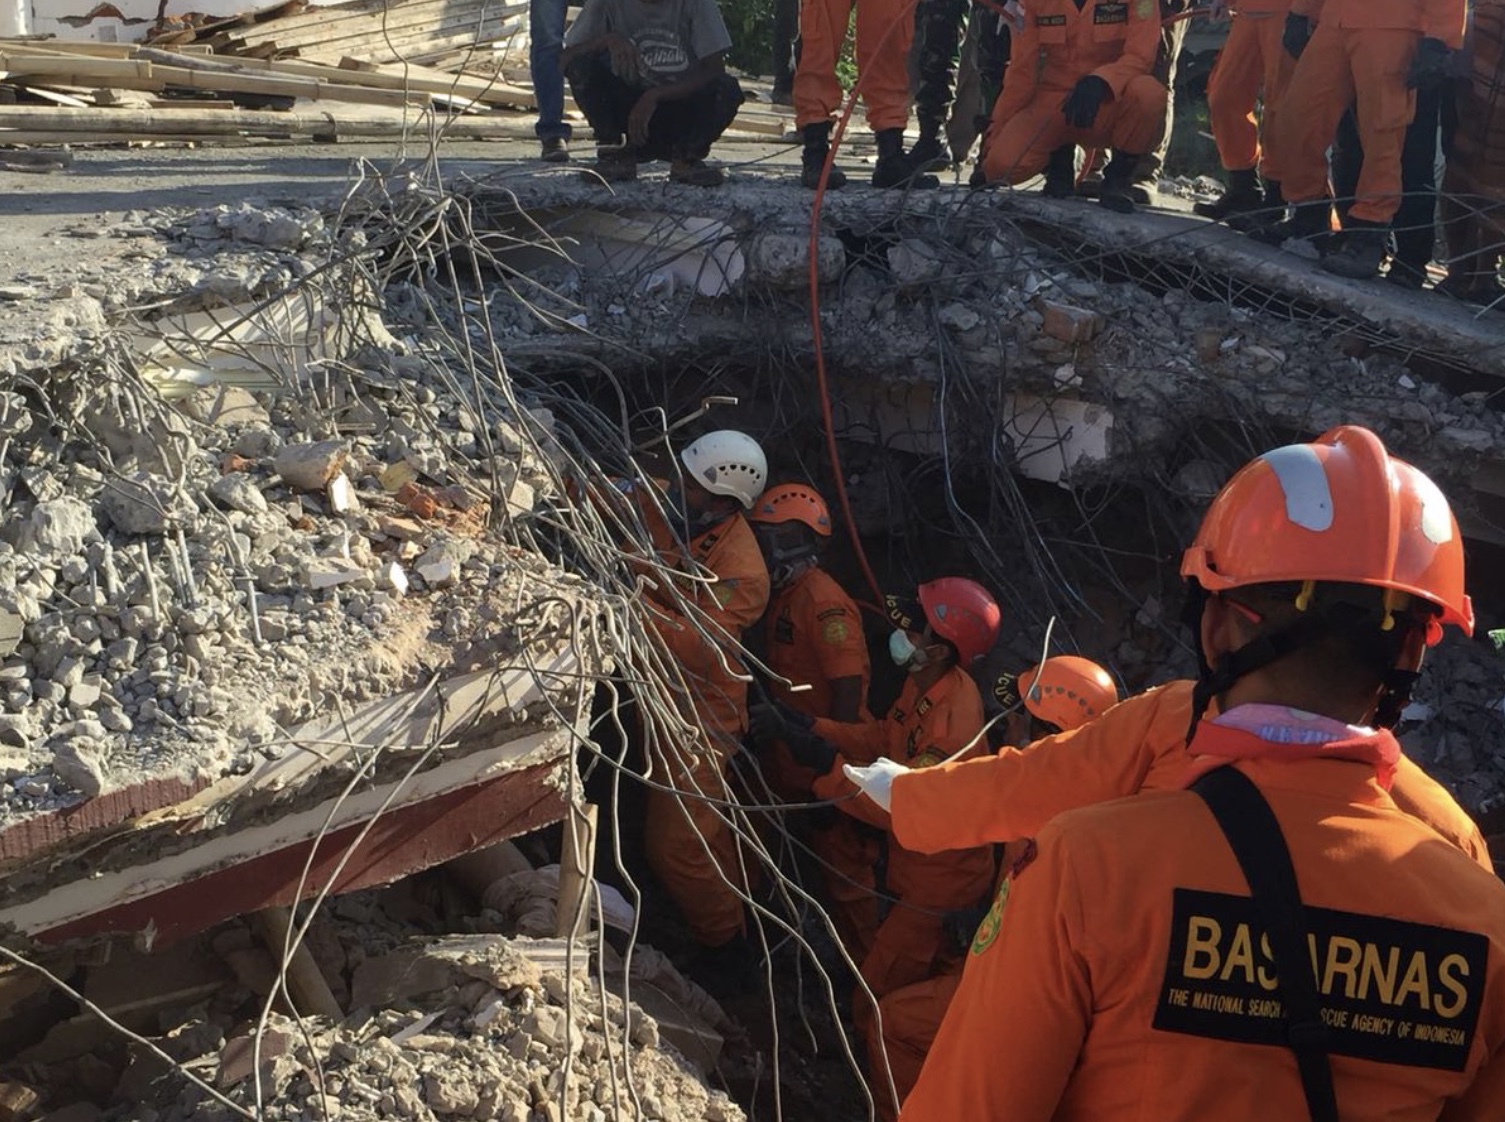 A team from the National Search and Rescue Agency continues to unearth victims from under the wreckage in Lombok. Photo via Sutopo Purwo Nugroho/BNPB